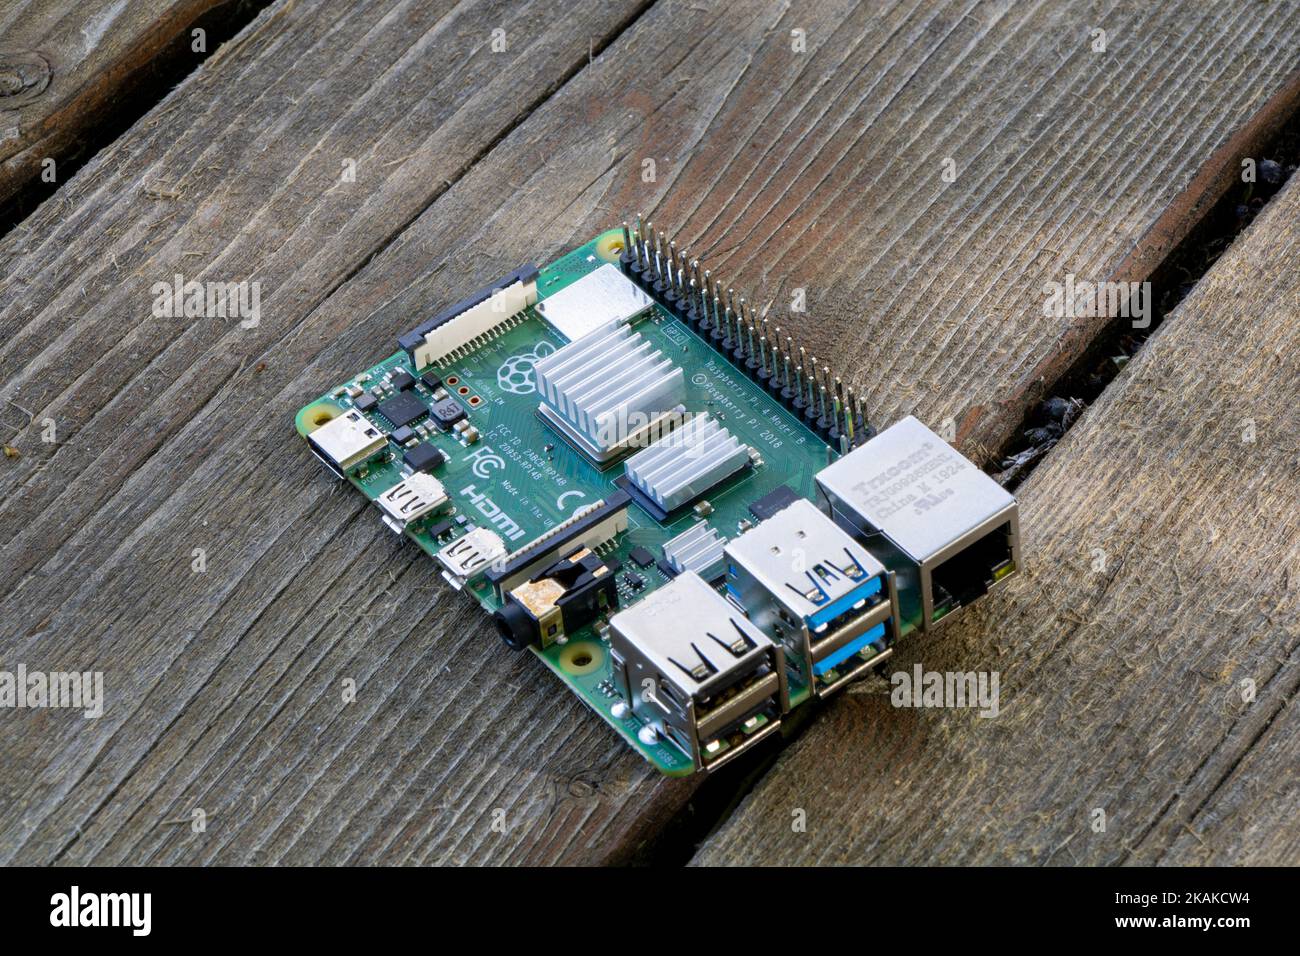 A Raspberry Pi Microcomputer 4B, for Electrical Engineering prototyping and software development for K-12 STEM Stock Photo